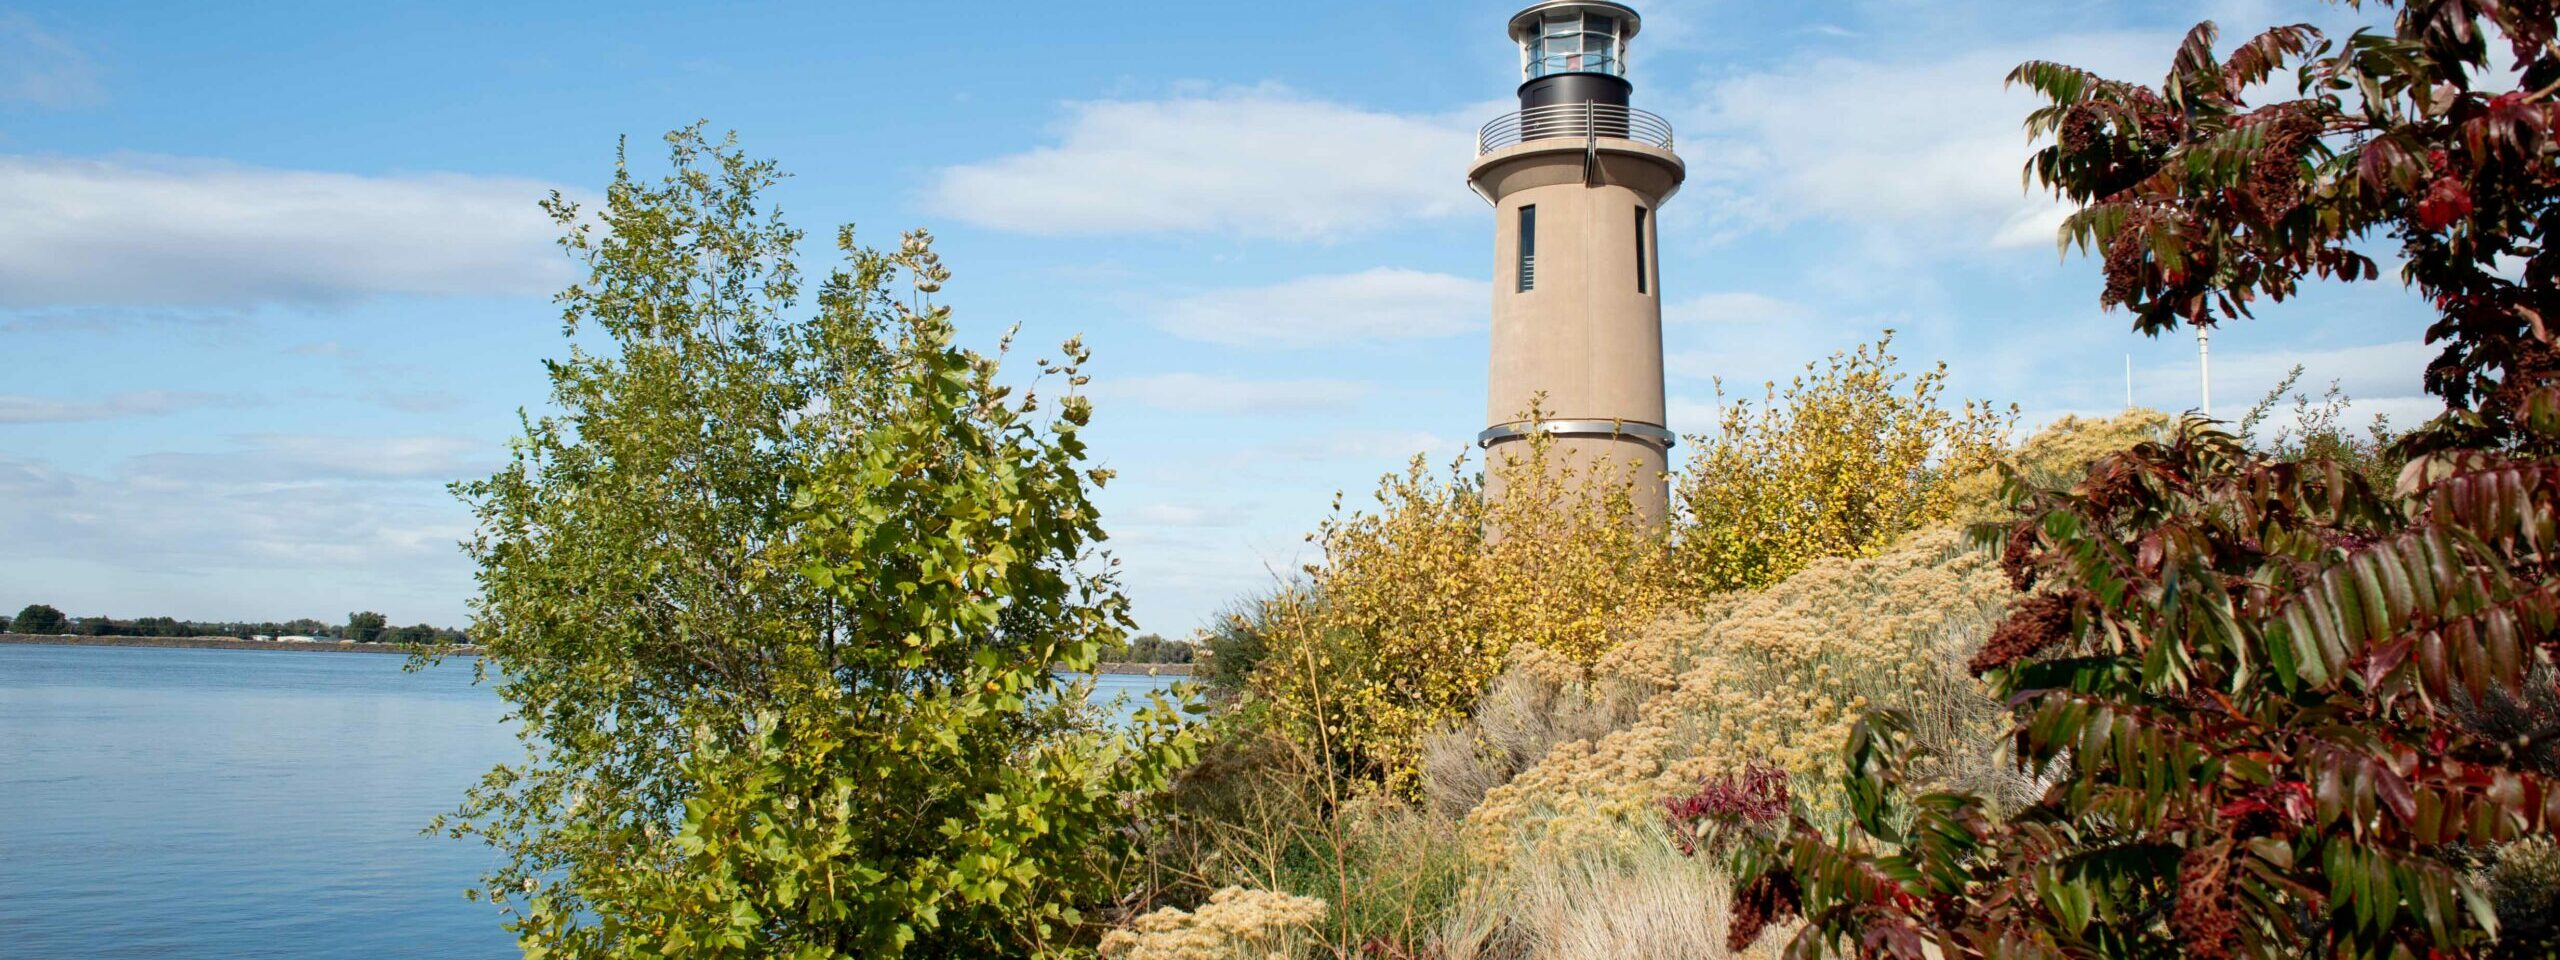 A portion of the restored shoreline surrounds the Clover Island Lighthouse.